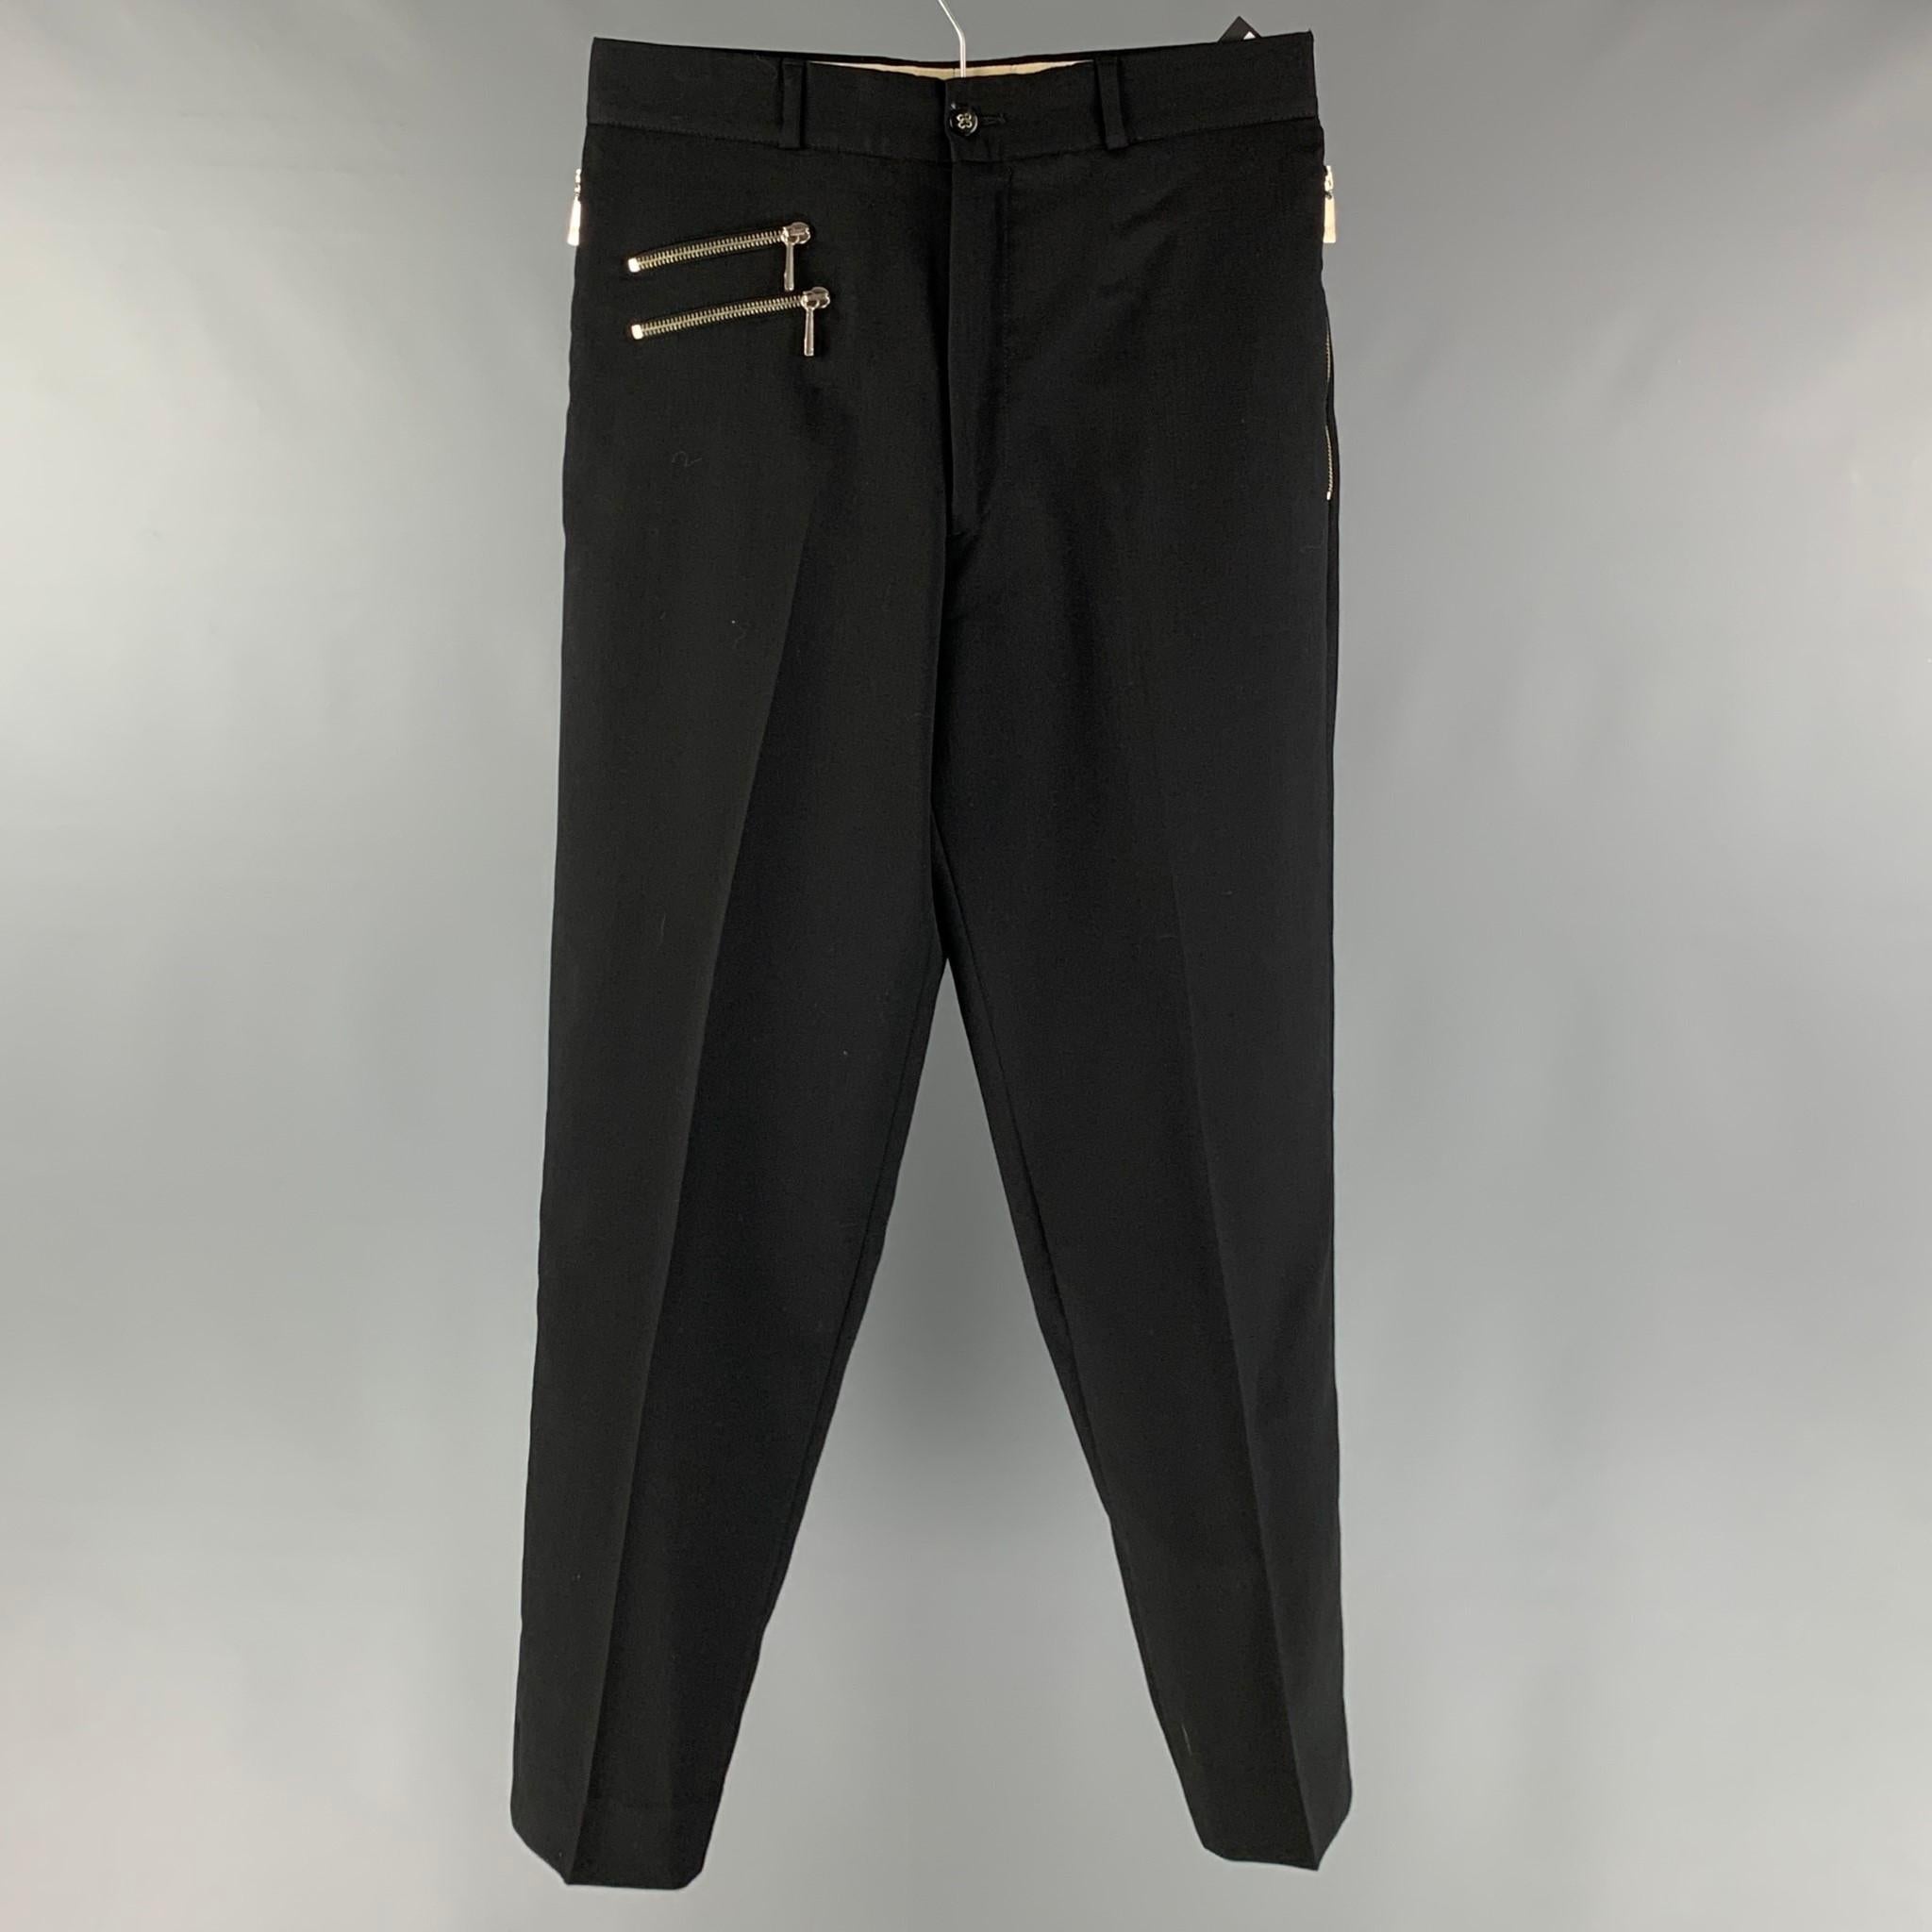 VINTAGE CLAUDE MONTANA dress pants comes in a black wool woven material featuring a flat front, zipper details, zipper pockets, and a zipper fly closure.

Very Good Pre-Owned Condition.
Marked: 48

Measurements:

Waist: 31 in.
Rise: 10.5 in.
Inseam: